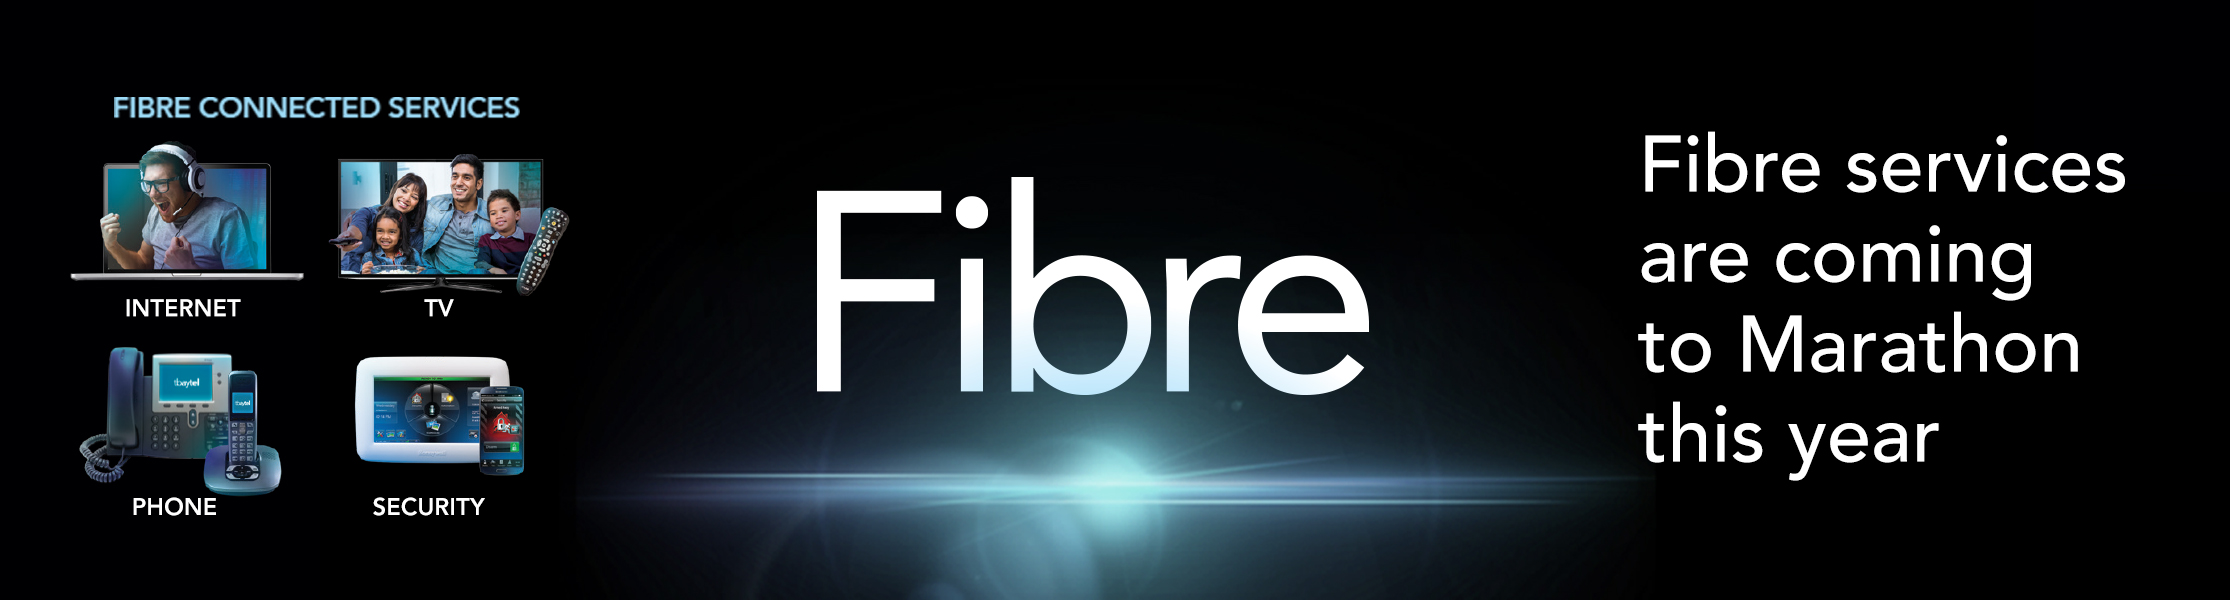 Fibre services are coming to Marathon this year